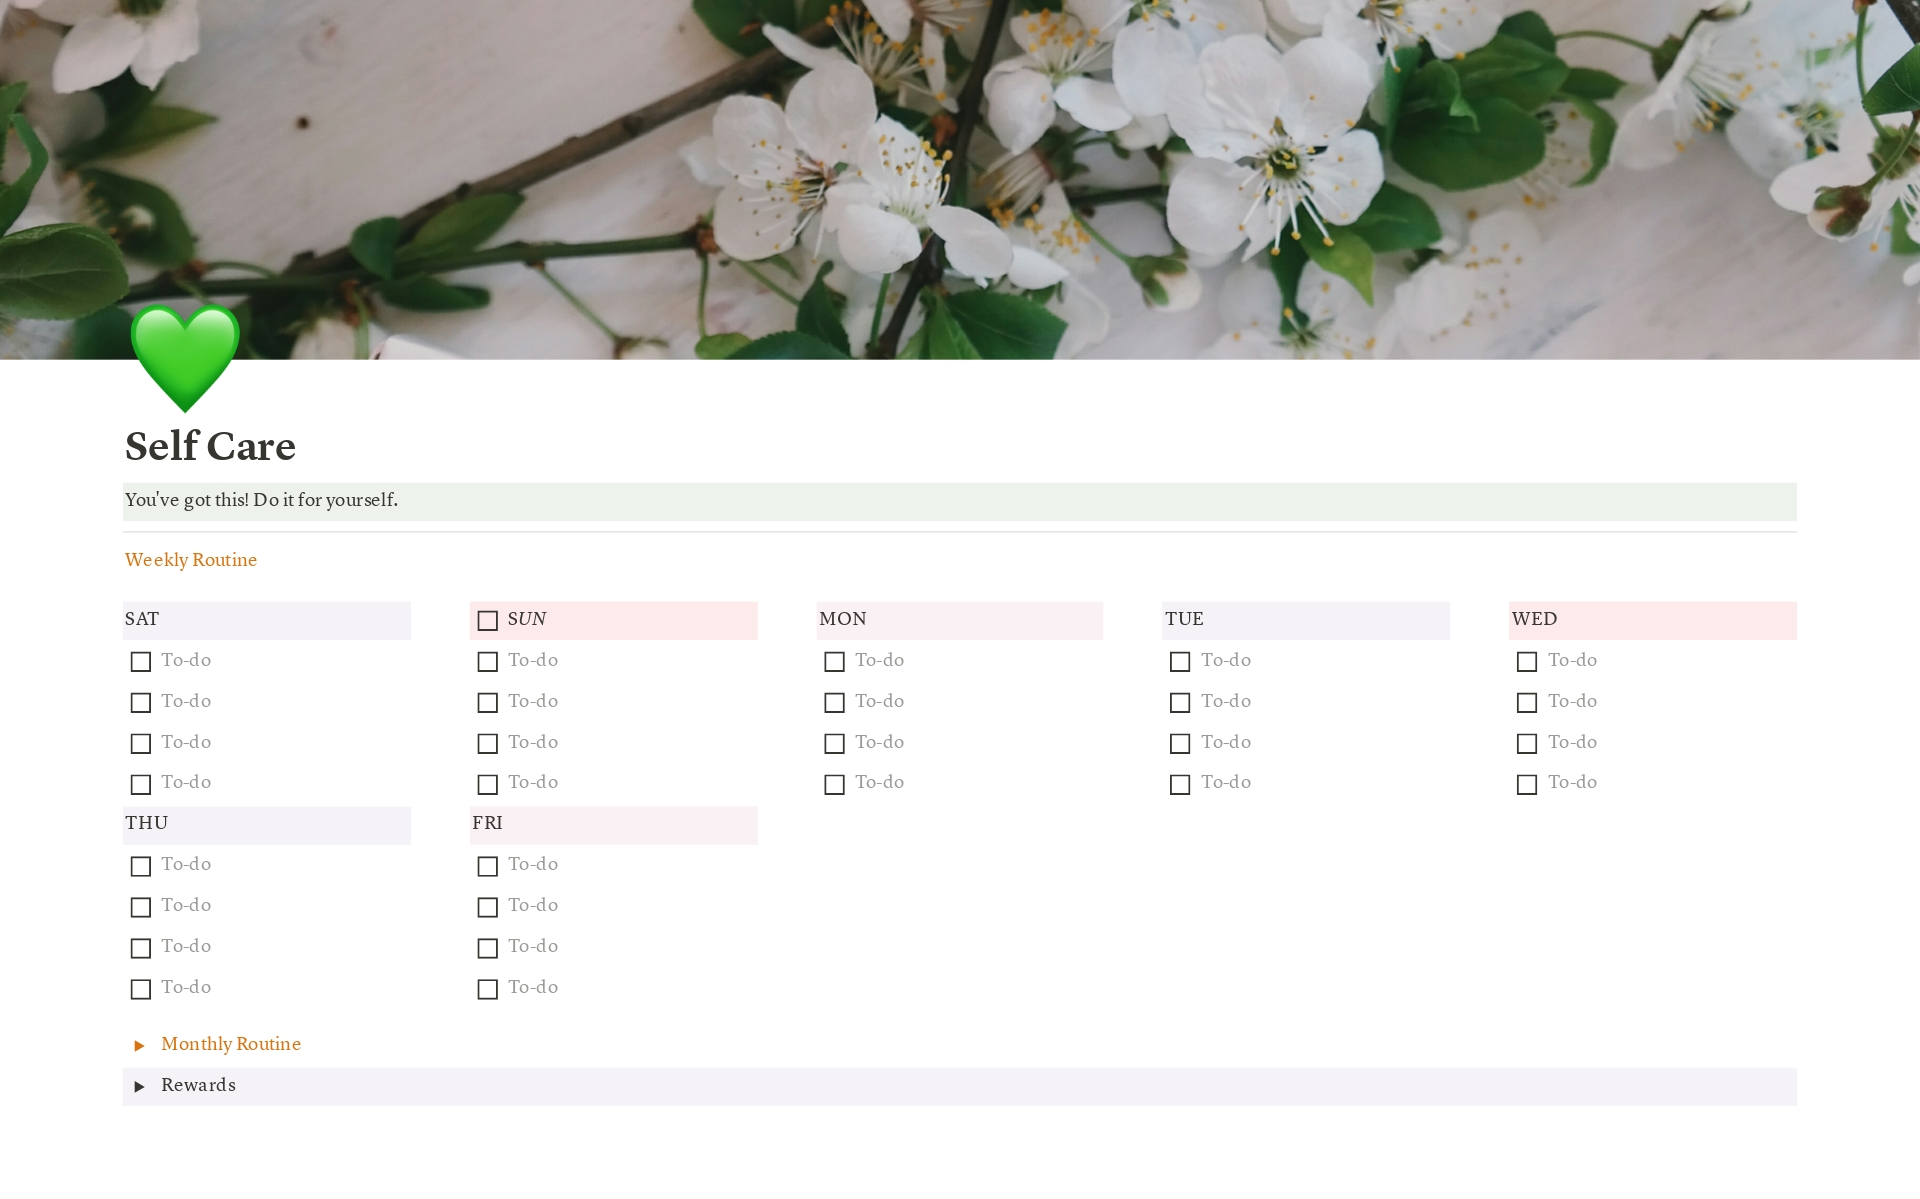 It is a self-care template that will help people to stay organized about their ideas. This template has section like weekly routine, monthly routine and self rewards.